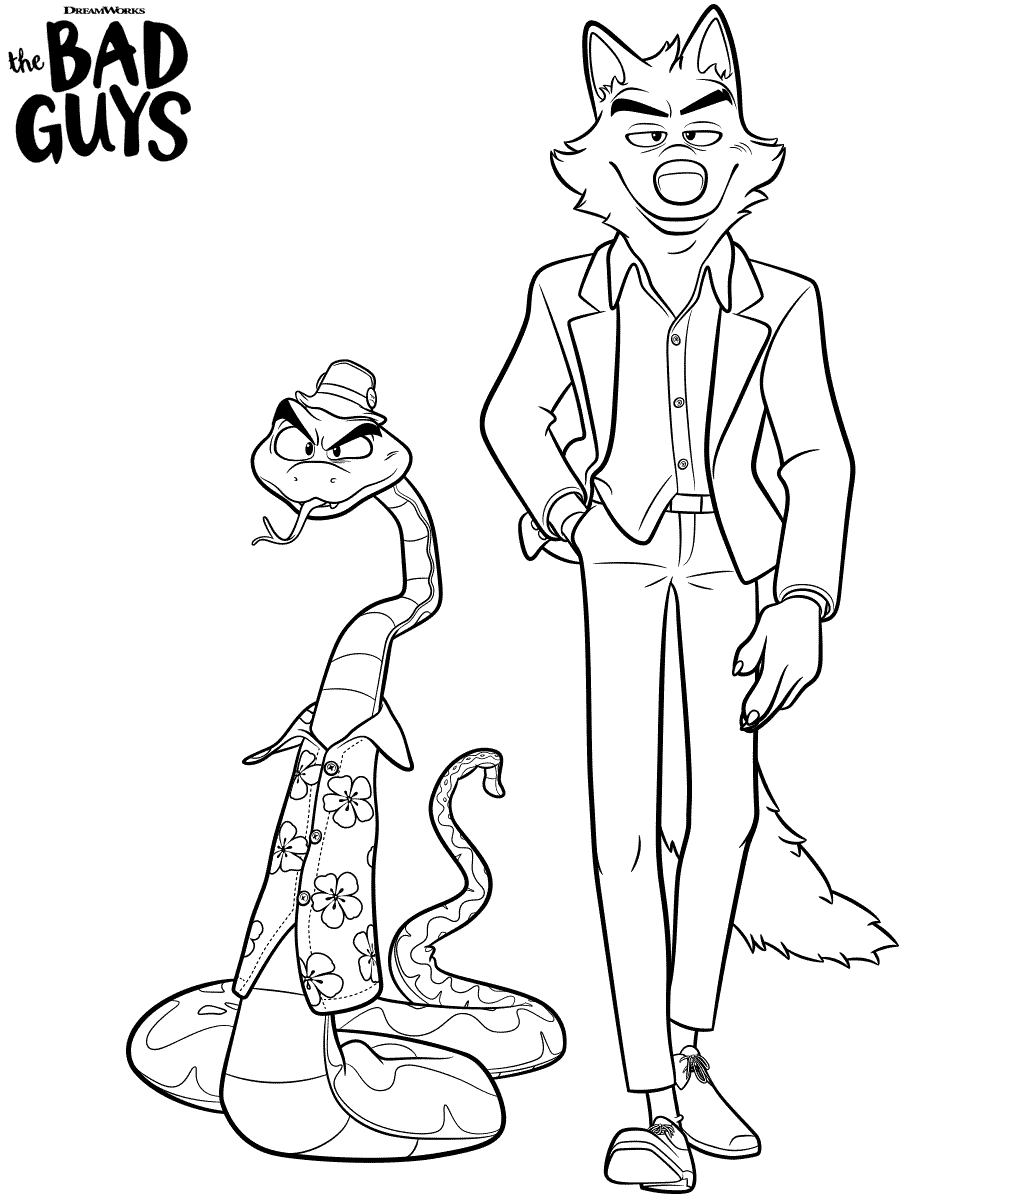 Mr. Snake and Mr. Wolf from Bad Guys Coloring Page